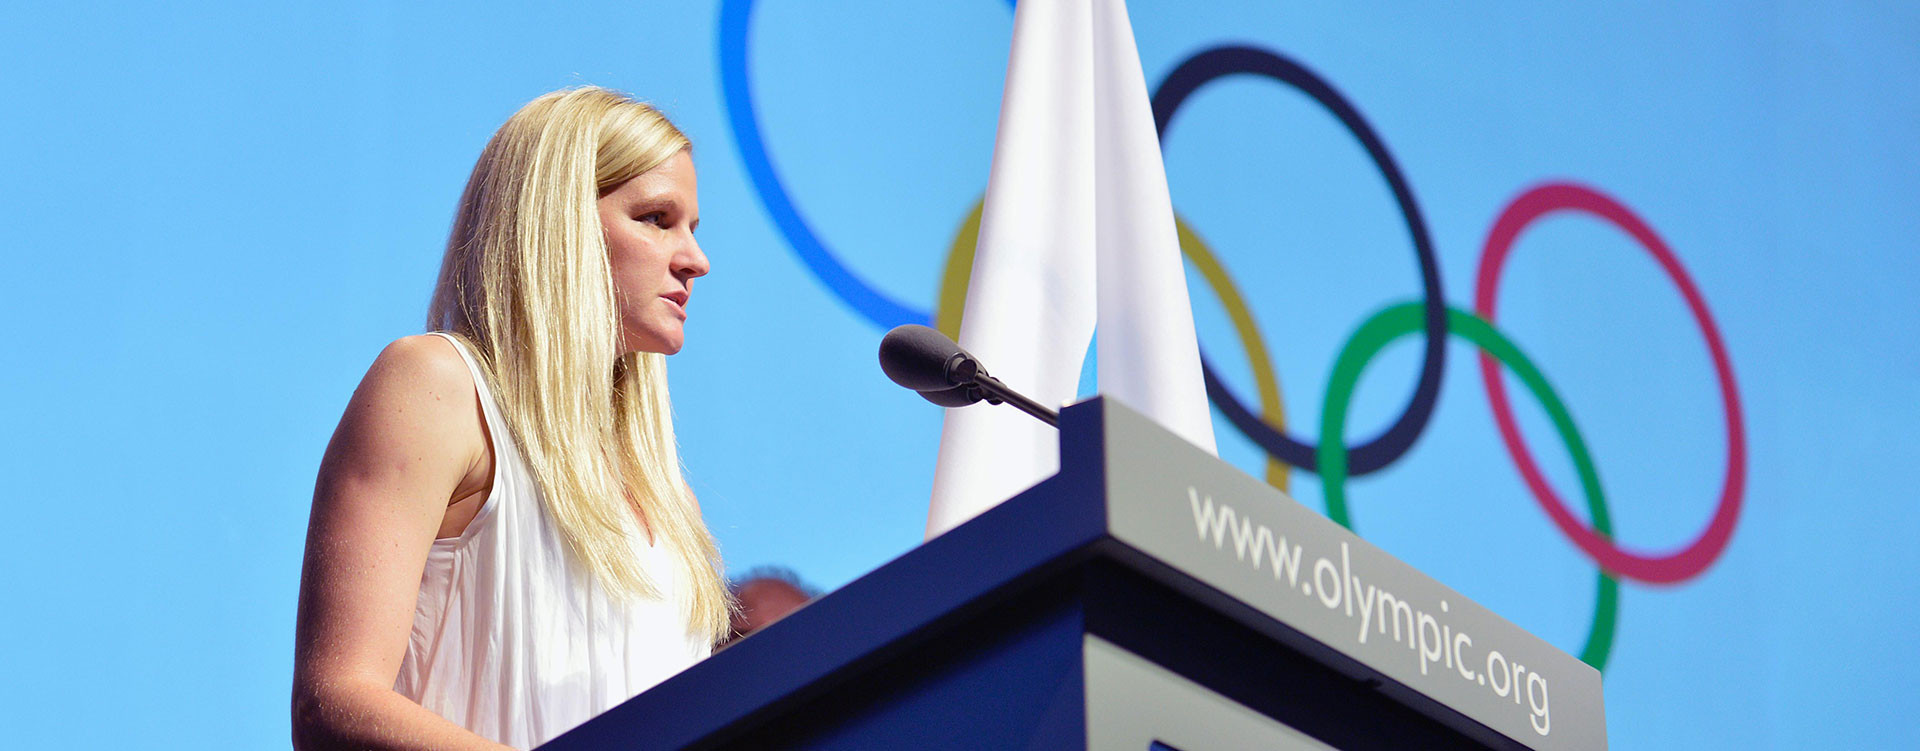 Doubts over how independent the Independent Testing Authority will be have been raised, especially after the appointment of two IOC members, including Kirsty Coventry, the Board ©IOC